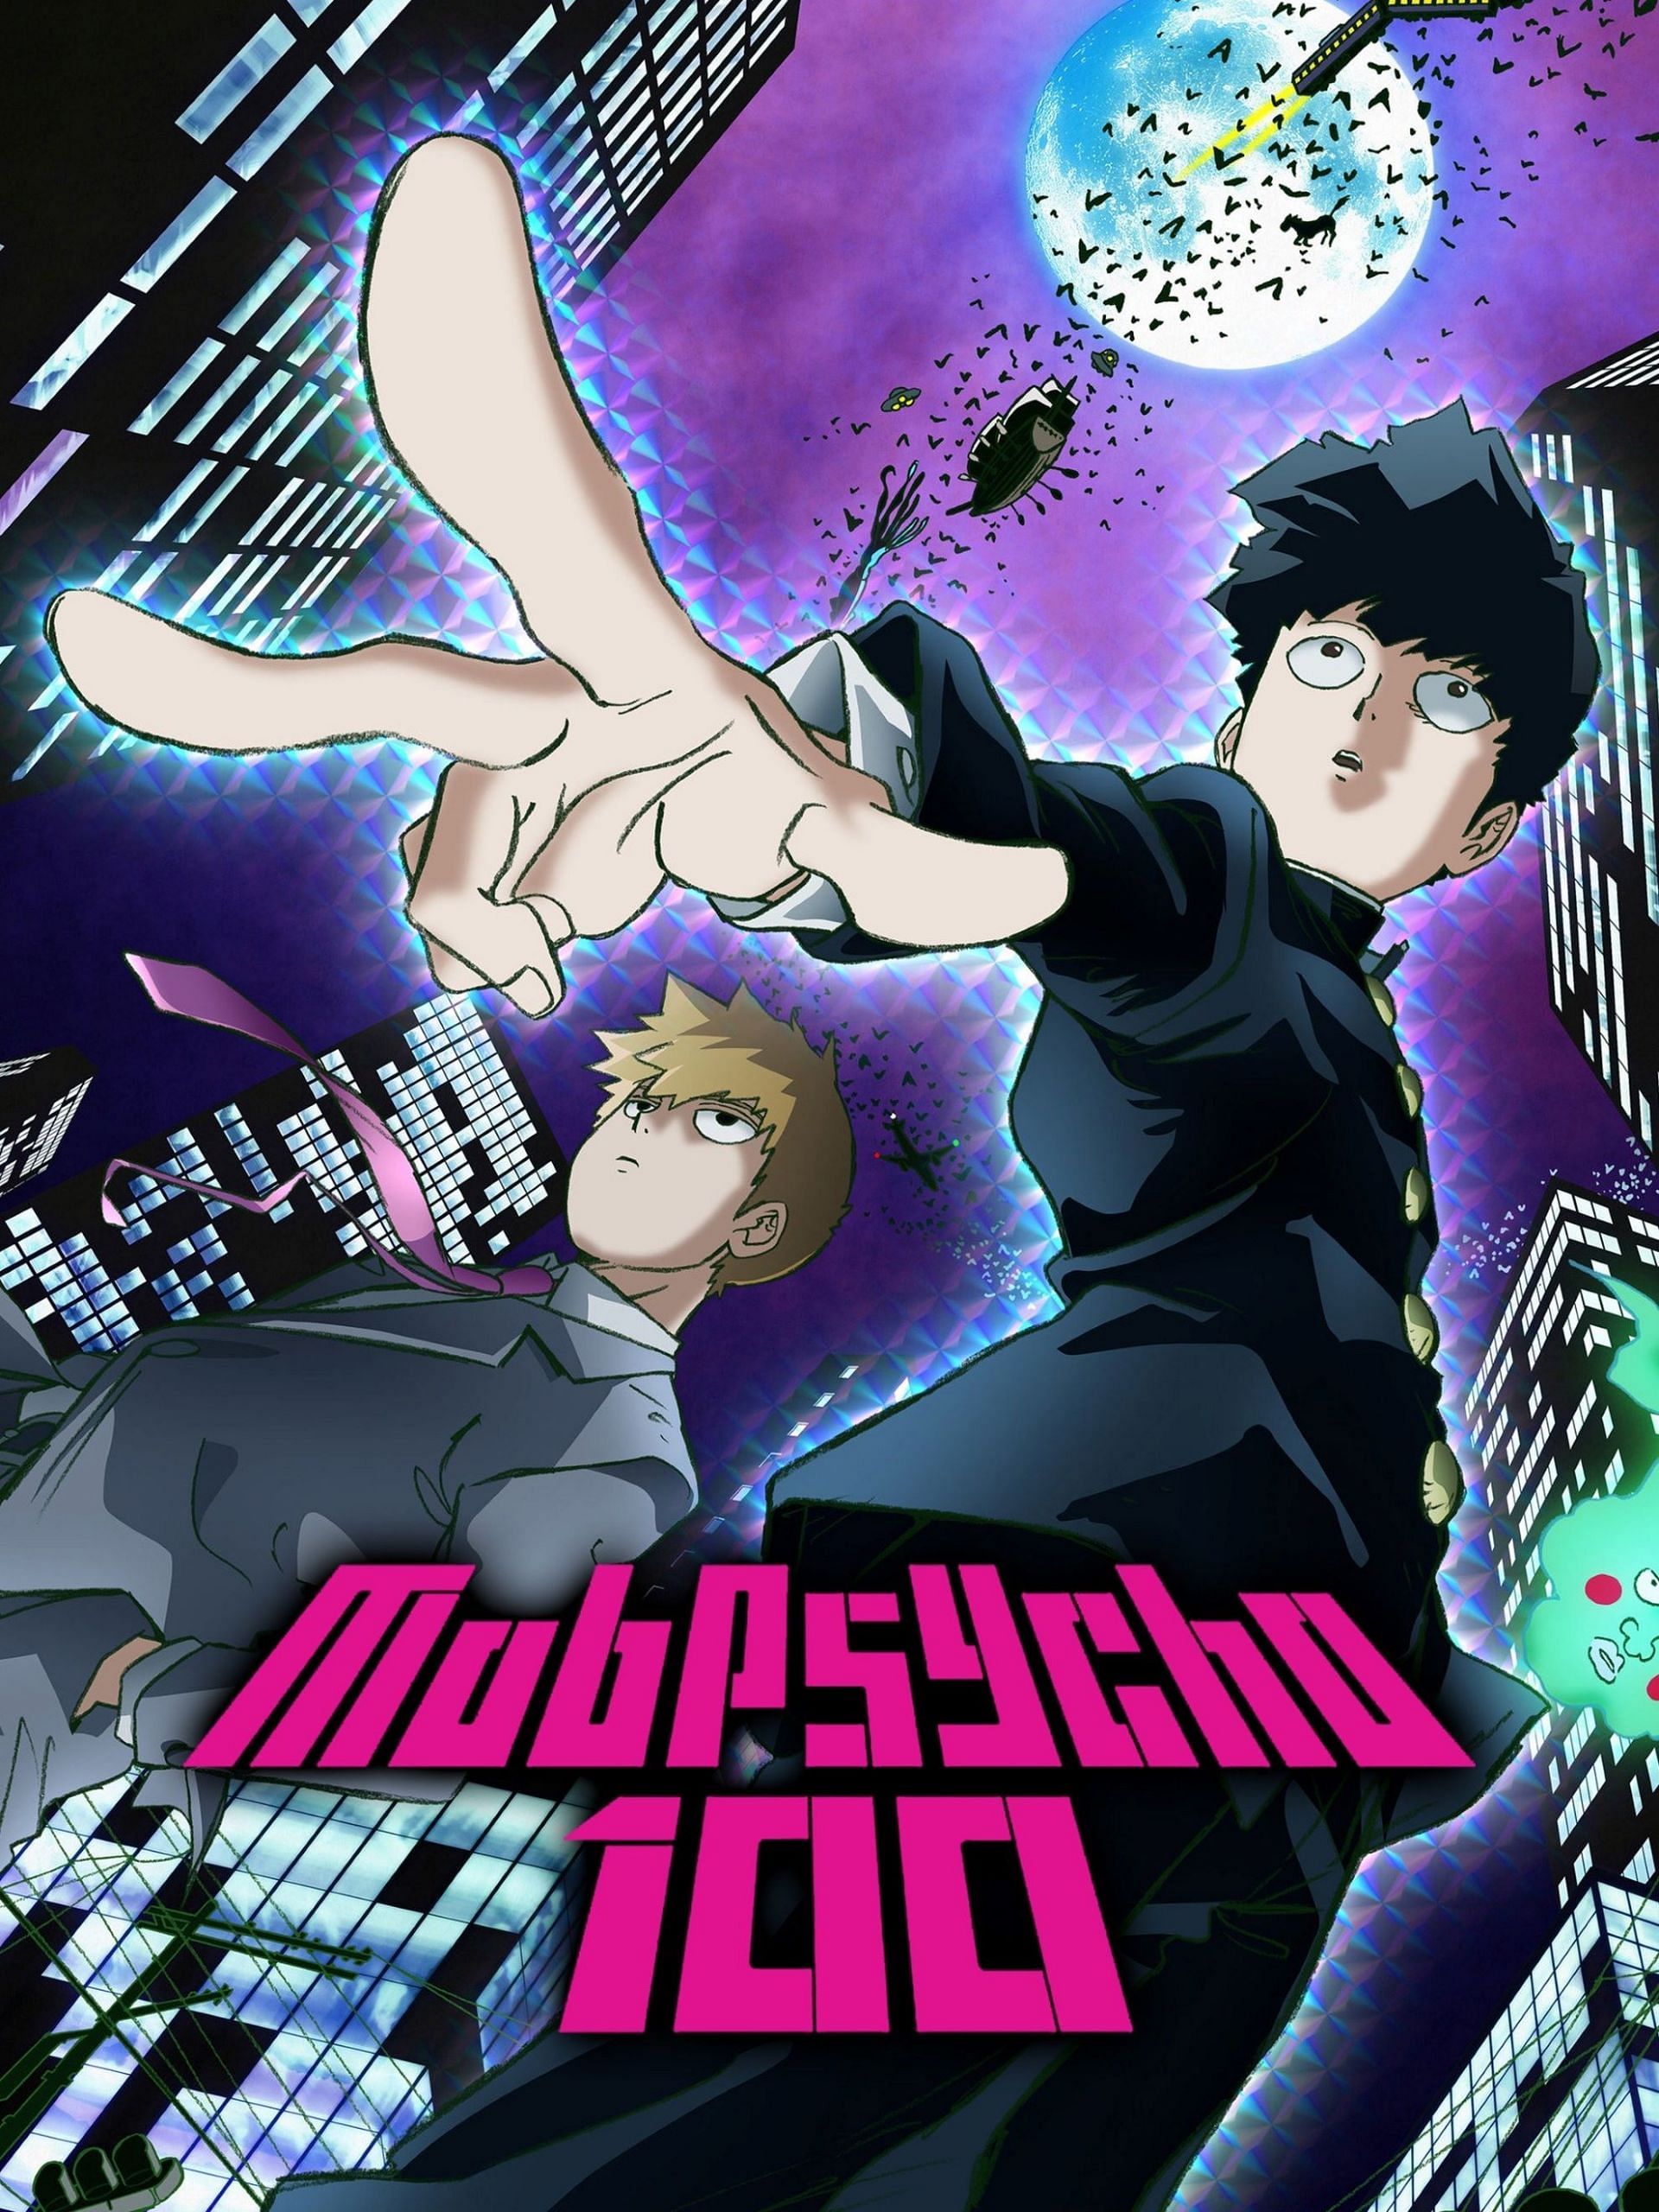 Mob Psycho 100 Unleashes the Perfect Winter Poster